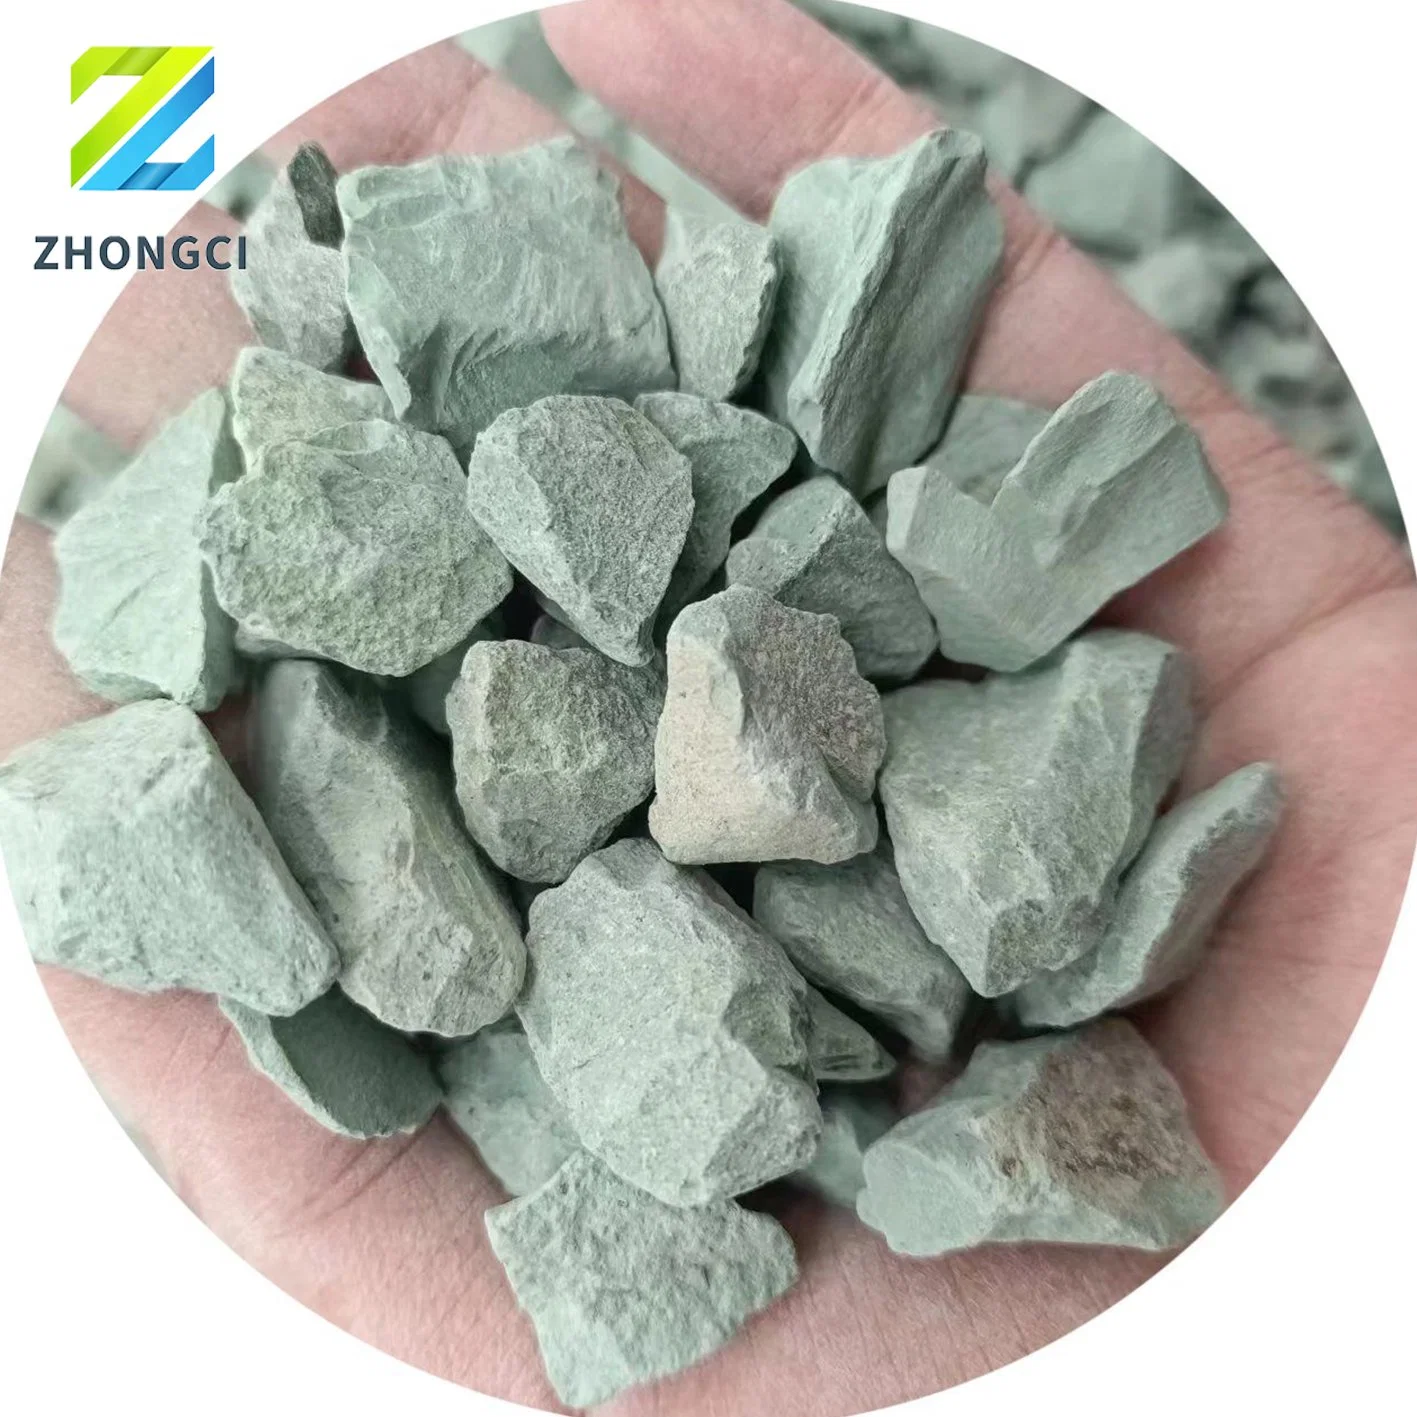 Zhongci Mineral Zeolite Powder for Water Treatment & Pool Filter Media